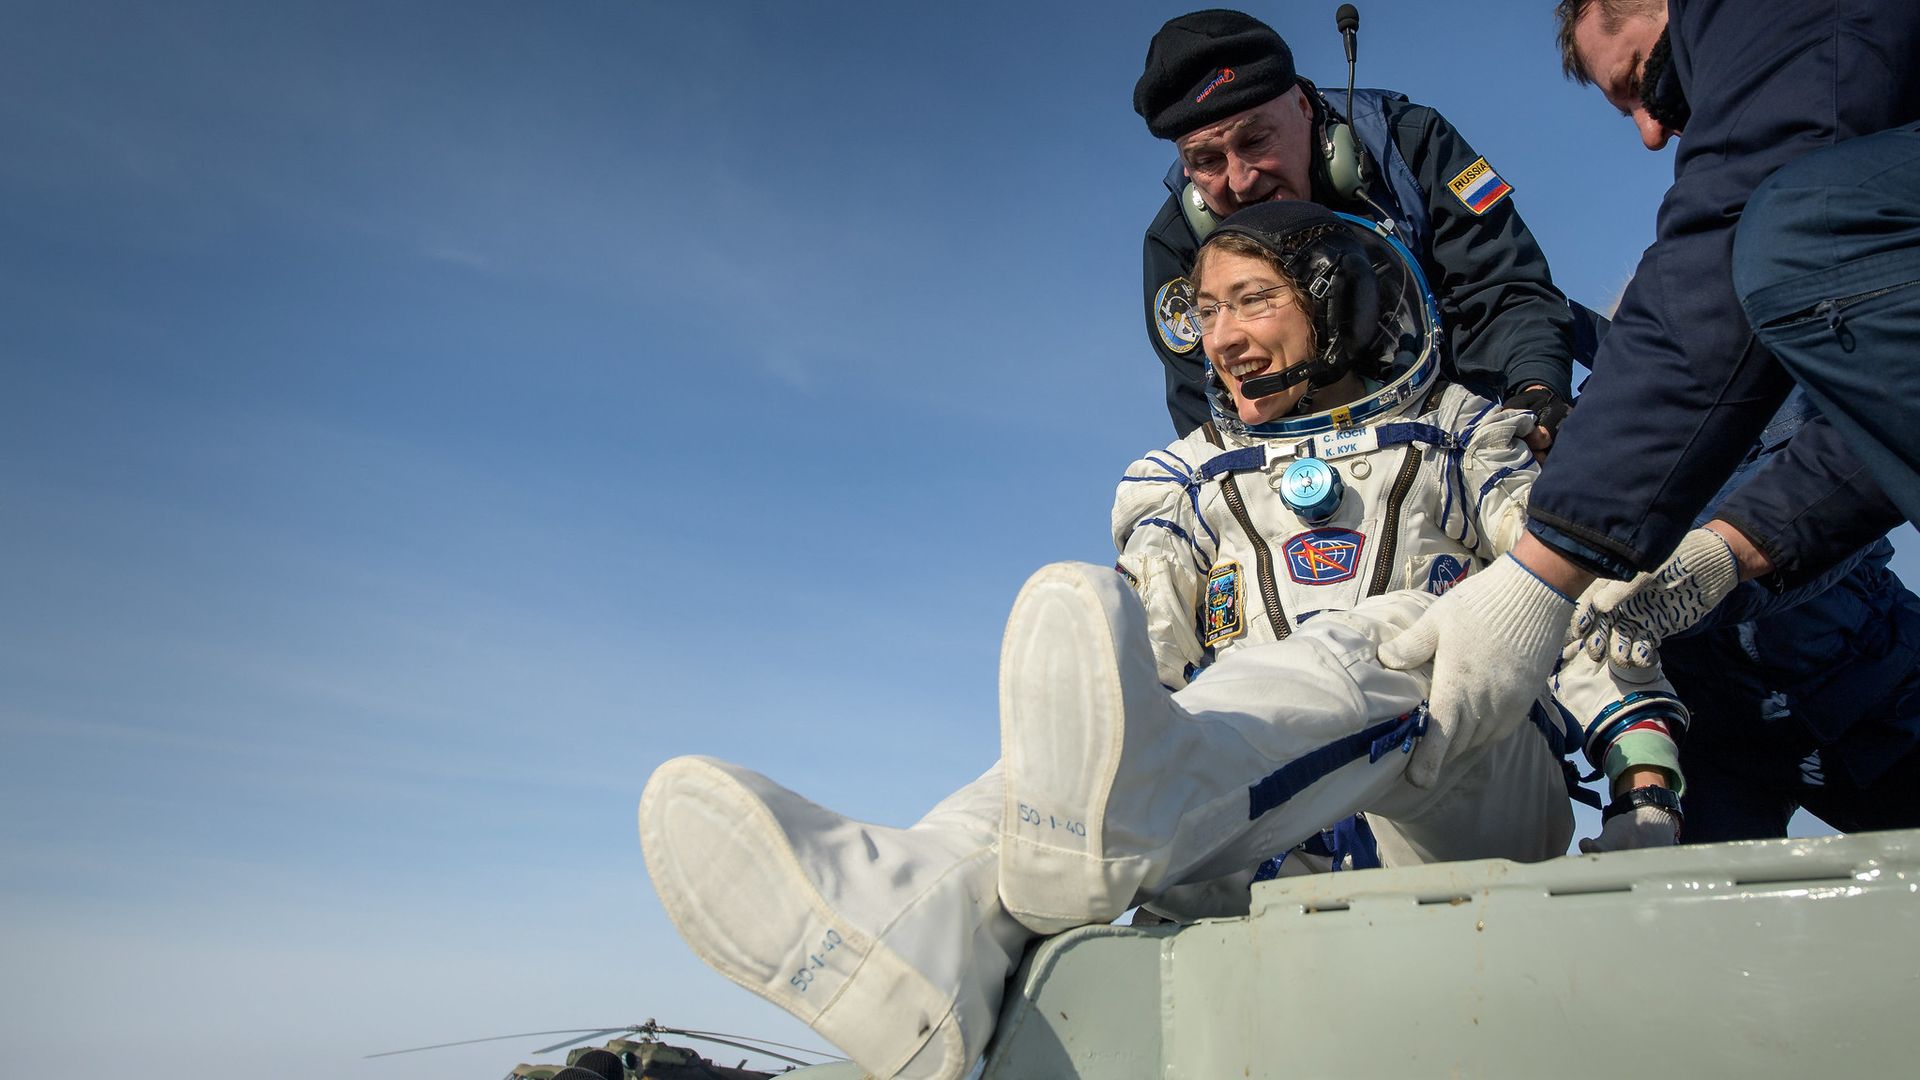 NASA astronaut Christina Koch smiles as she's pulled from her space capsule in Kazakhstan under a blue sky.